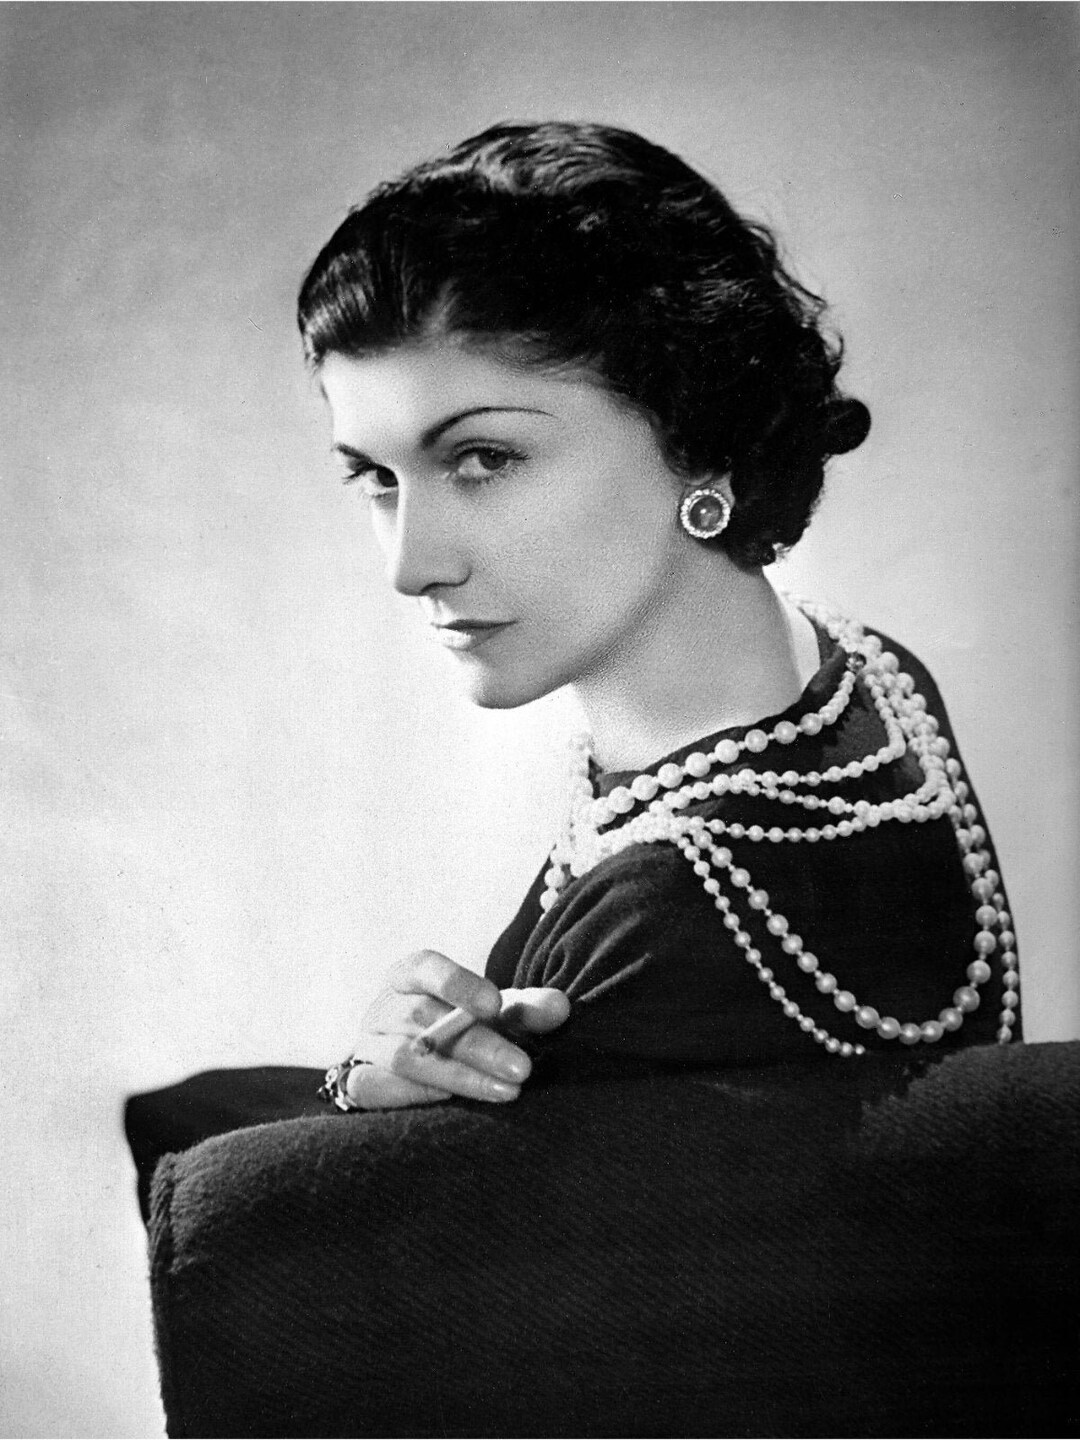  Coco Chanel Vintage Portrait Poster - Image by Shutterstock :  Everything Else